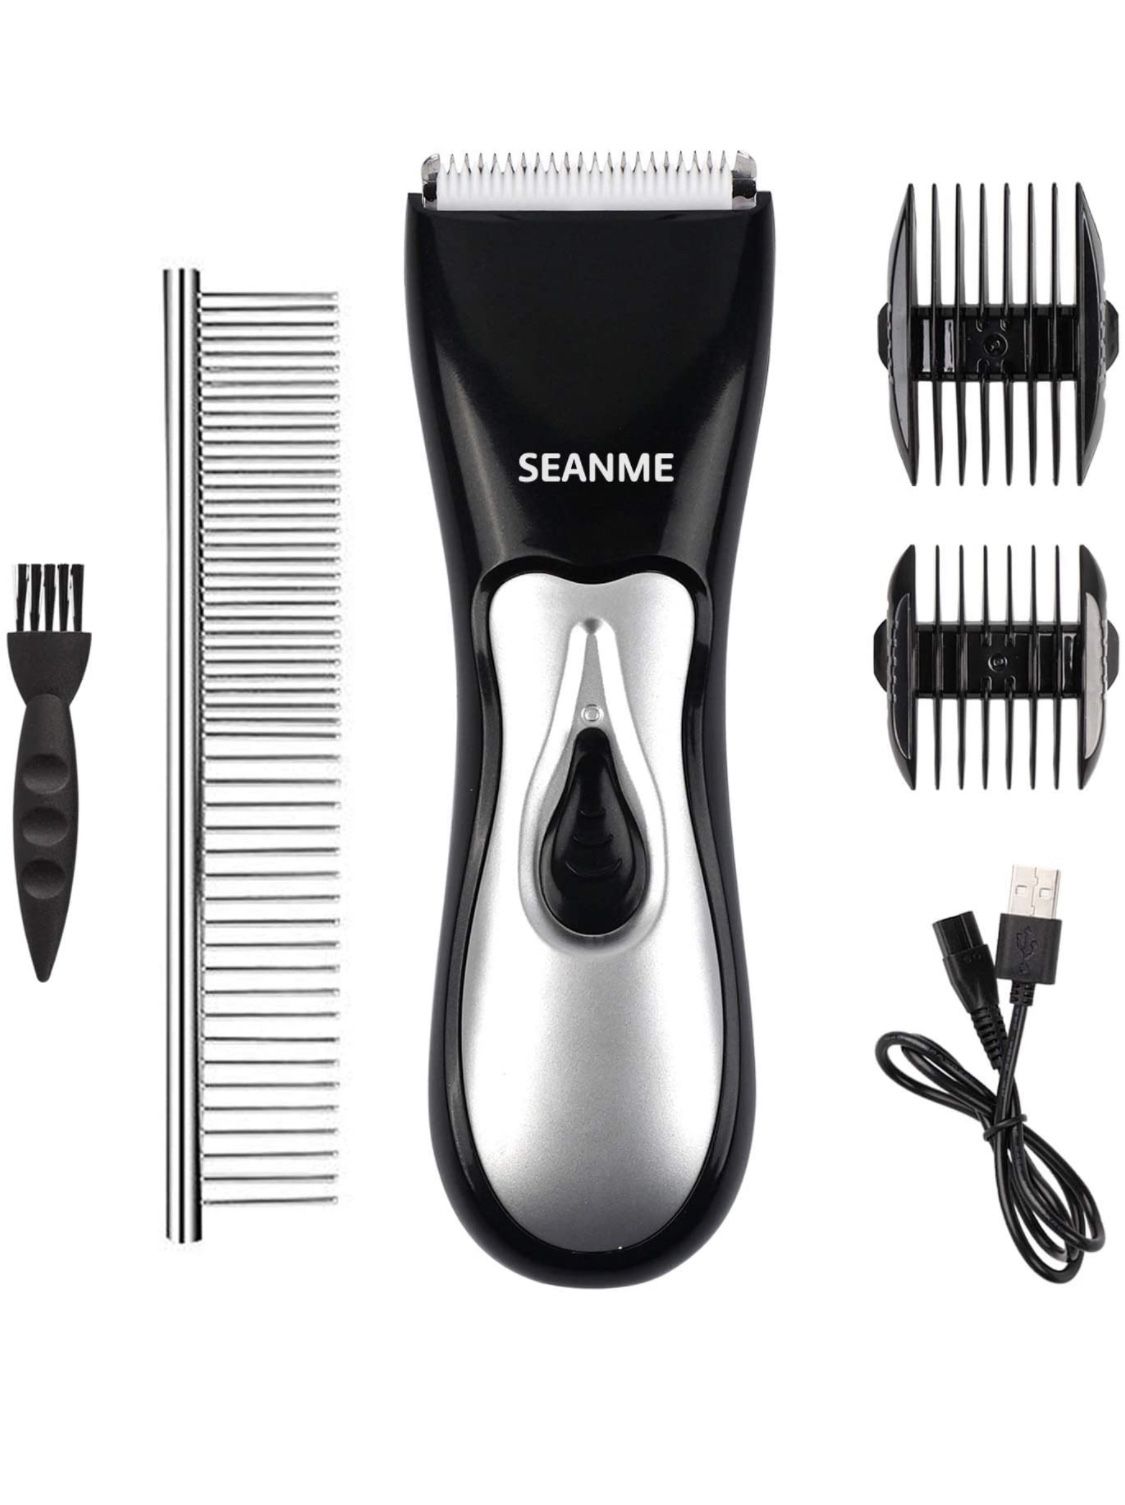 Dog Clippers Washable, New Upgrade Waterproof 2 in 1 Pet Grooming Kit with Double Blades Professional Electric Trimmer Set Rechargeable